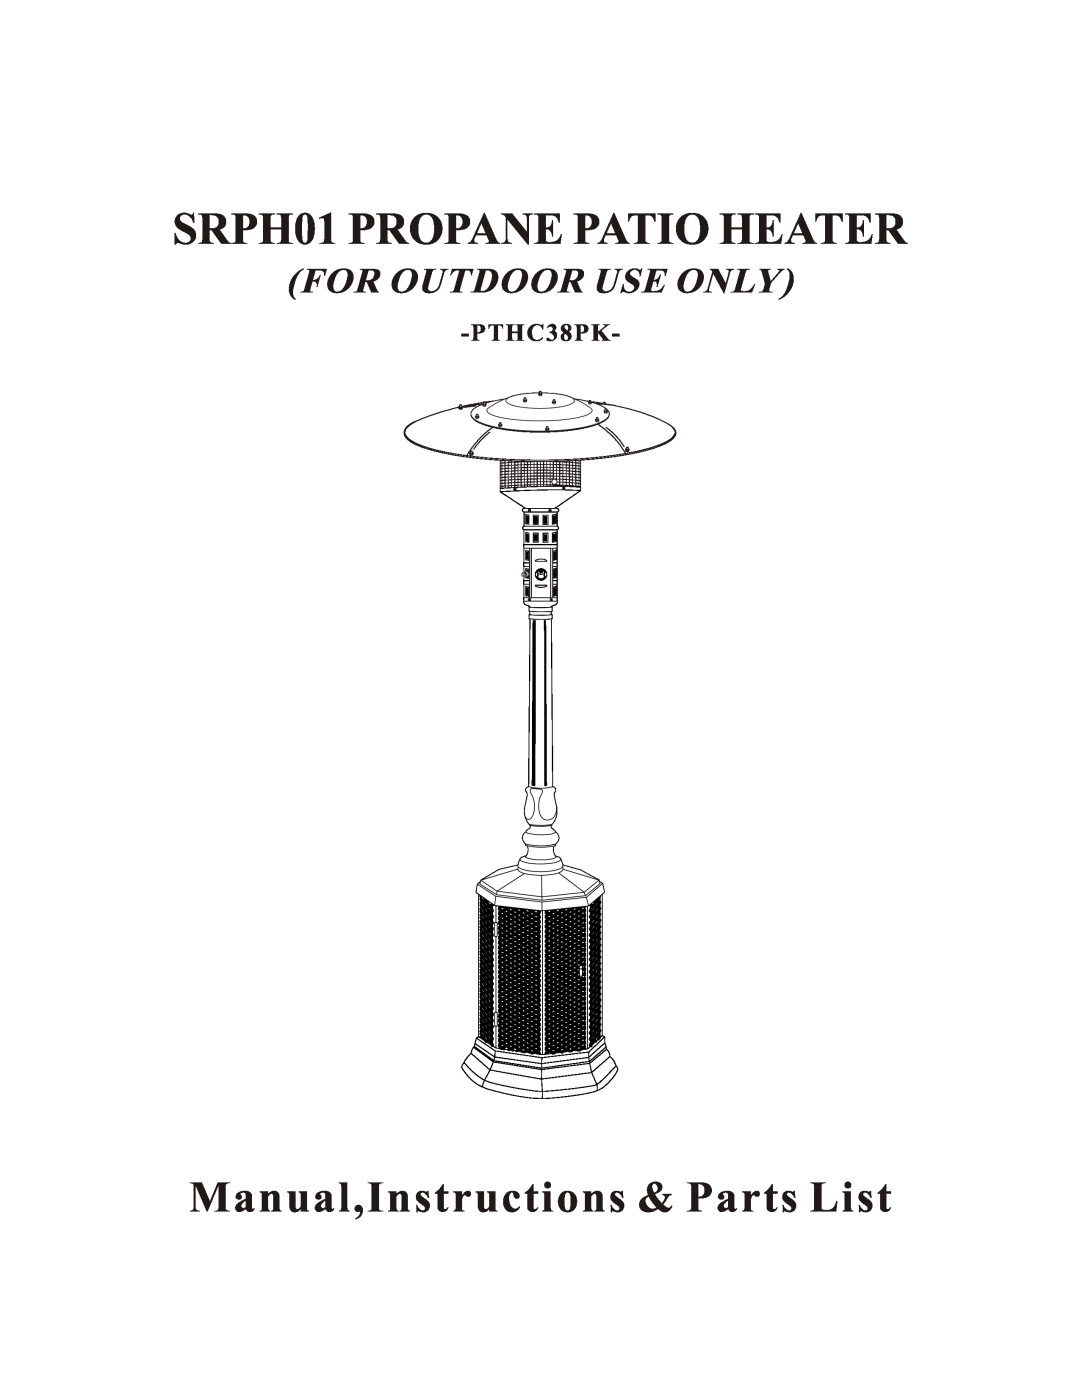 Napoleon Grills PTHC38PK manual SRPH01 PROPANE PATIO HEATER, Manual,Instructions & Parts List, For Outdoor Use Only 